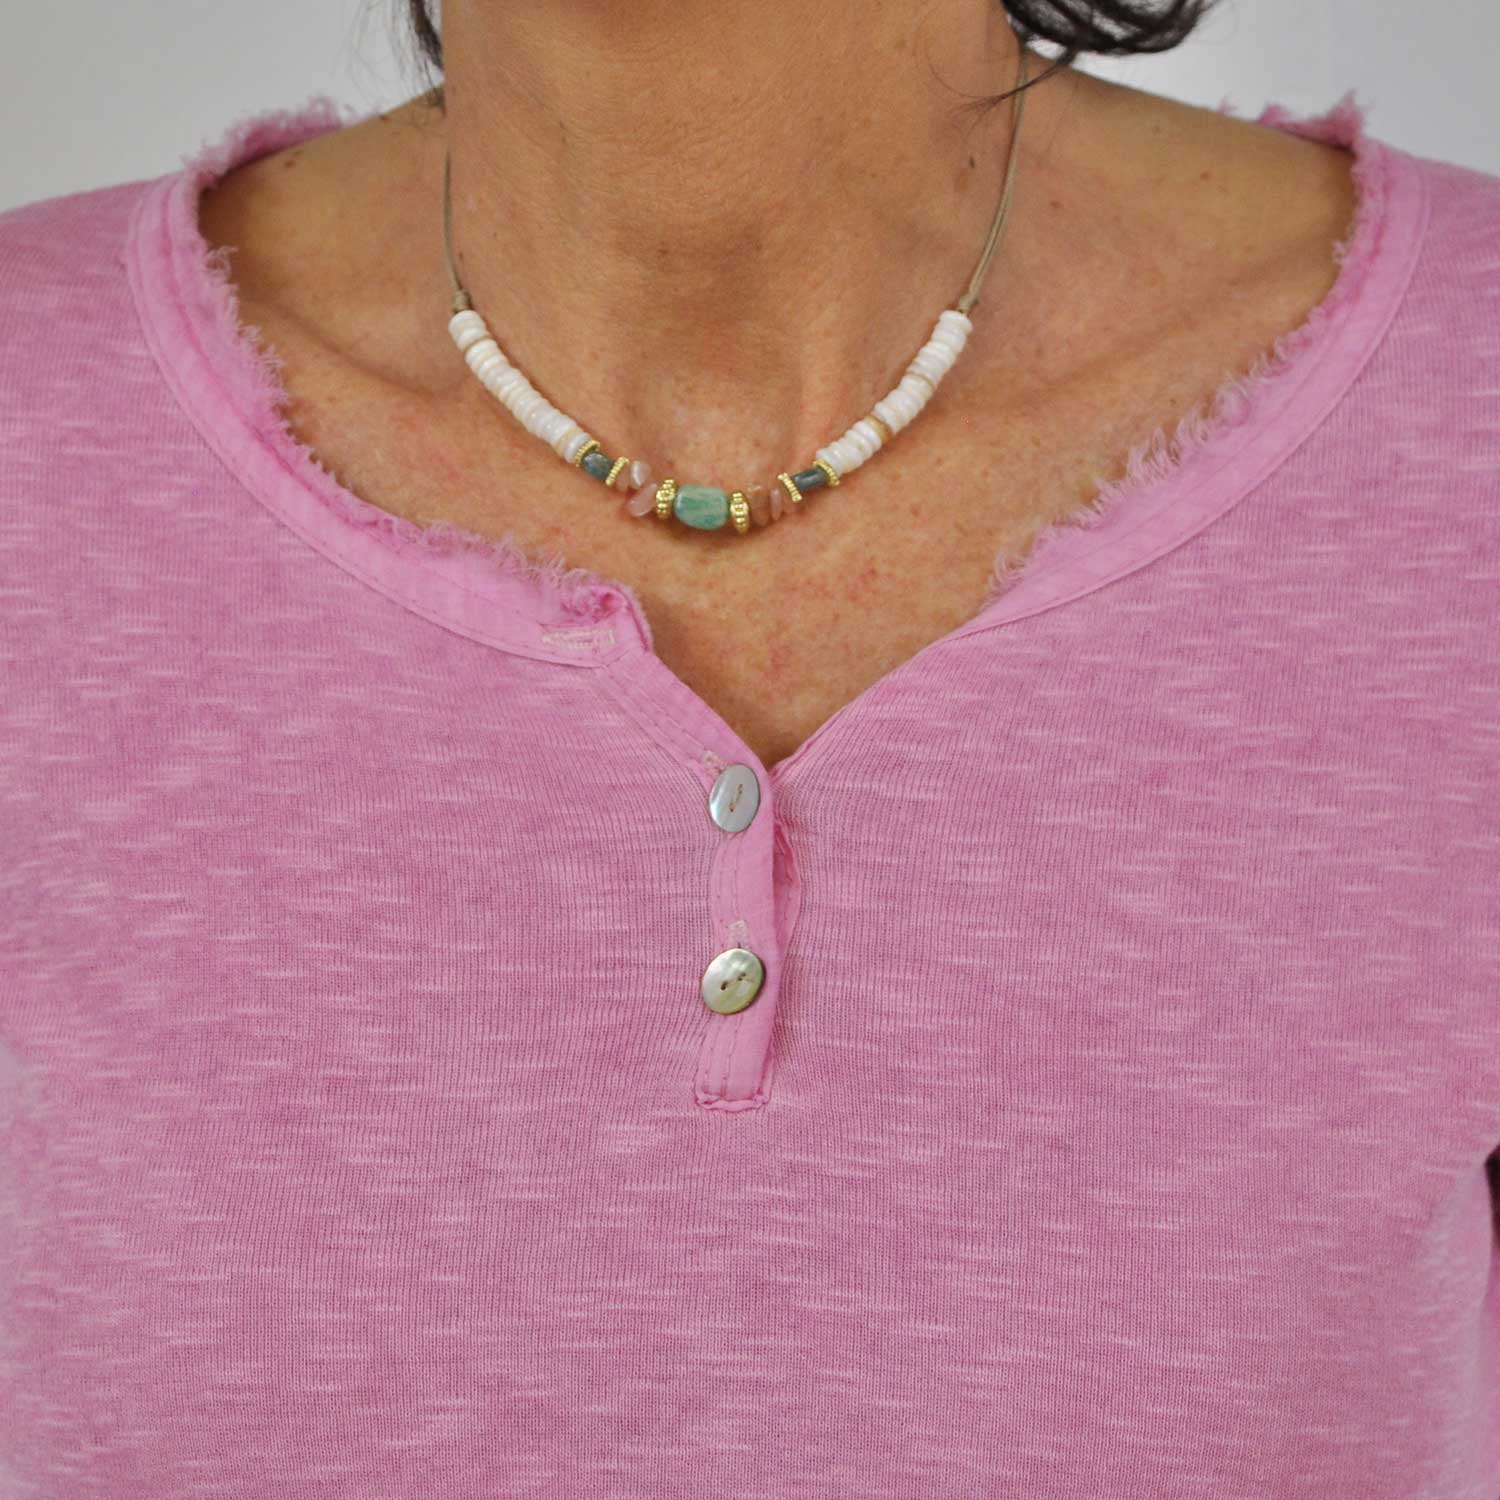 Turquoise and pink necklace